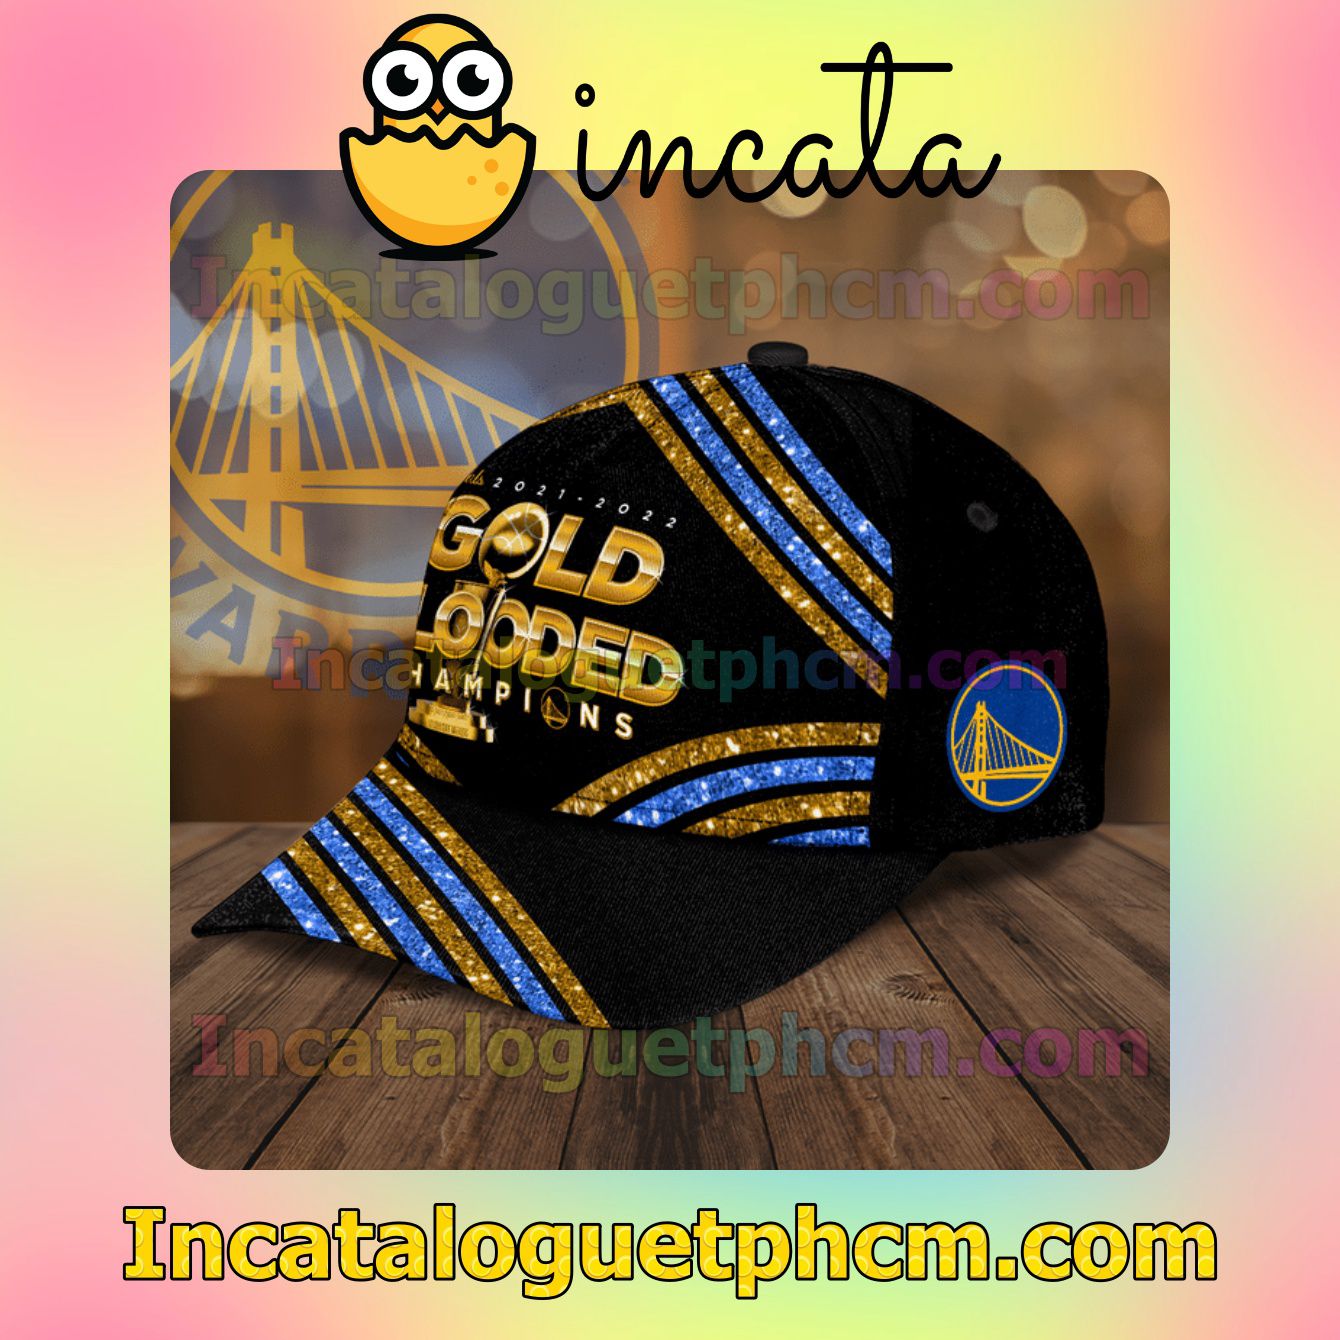 Best Finals 2021 2022 Gold Blooded Champions Glitter Stripes Classic Hat Caps Gift For Men